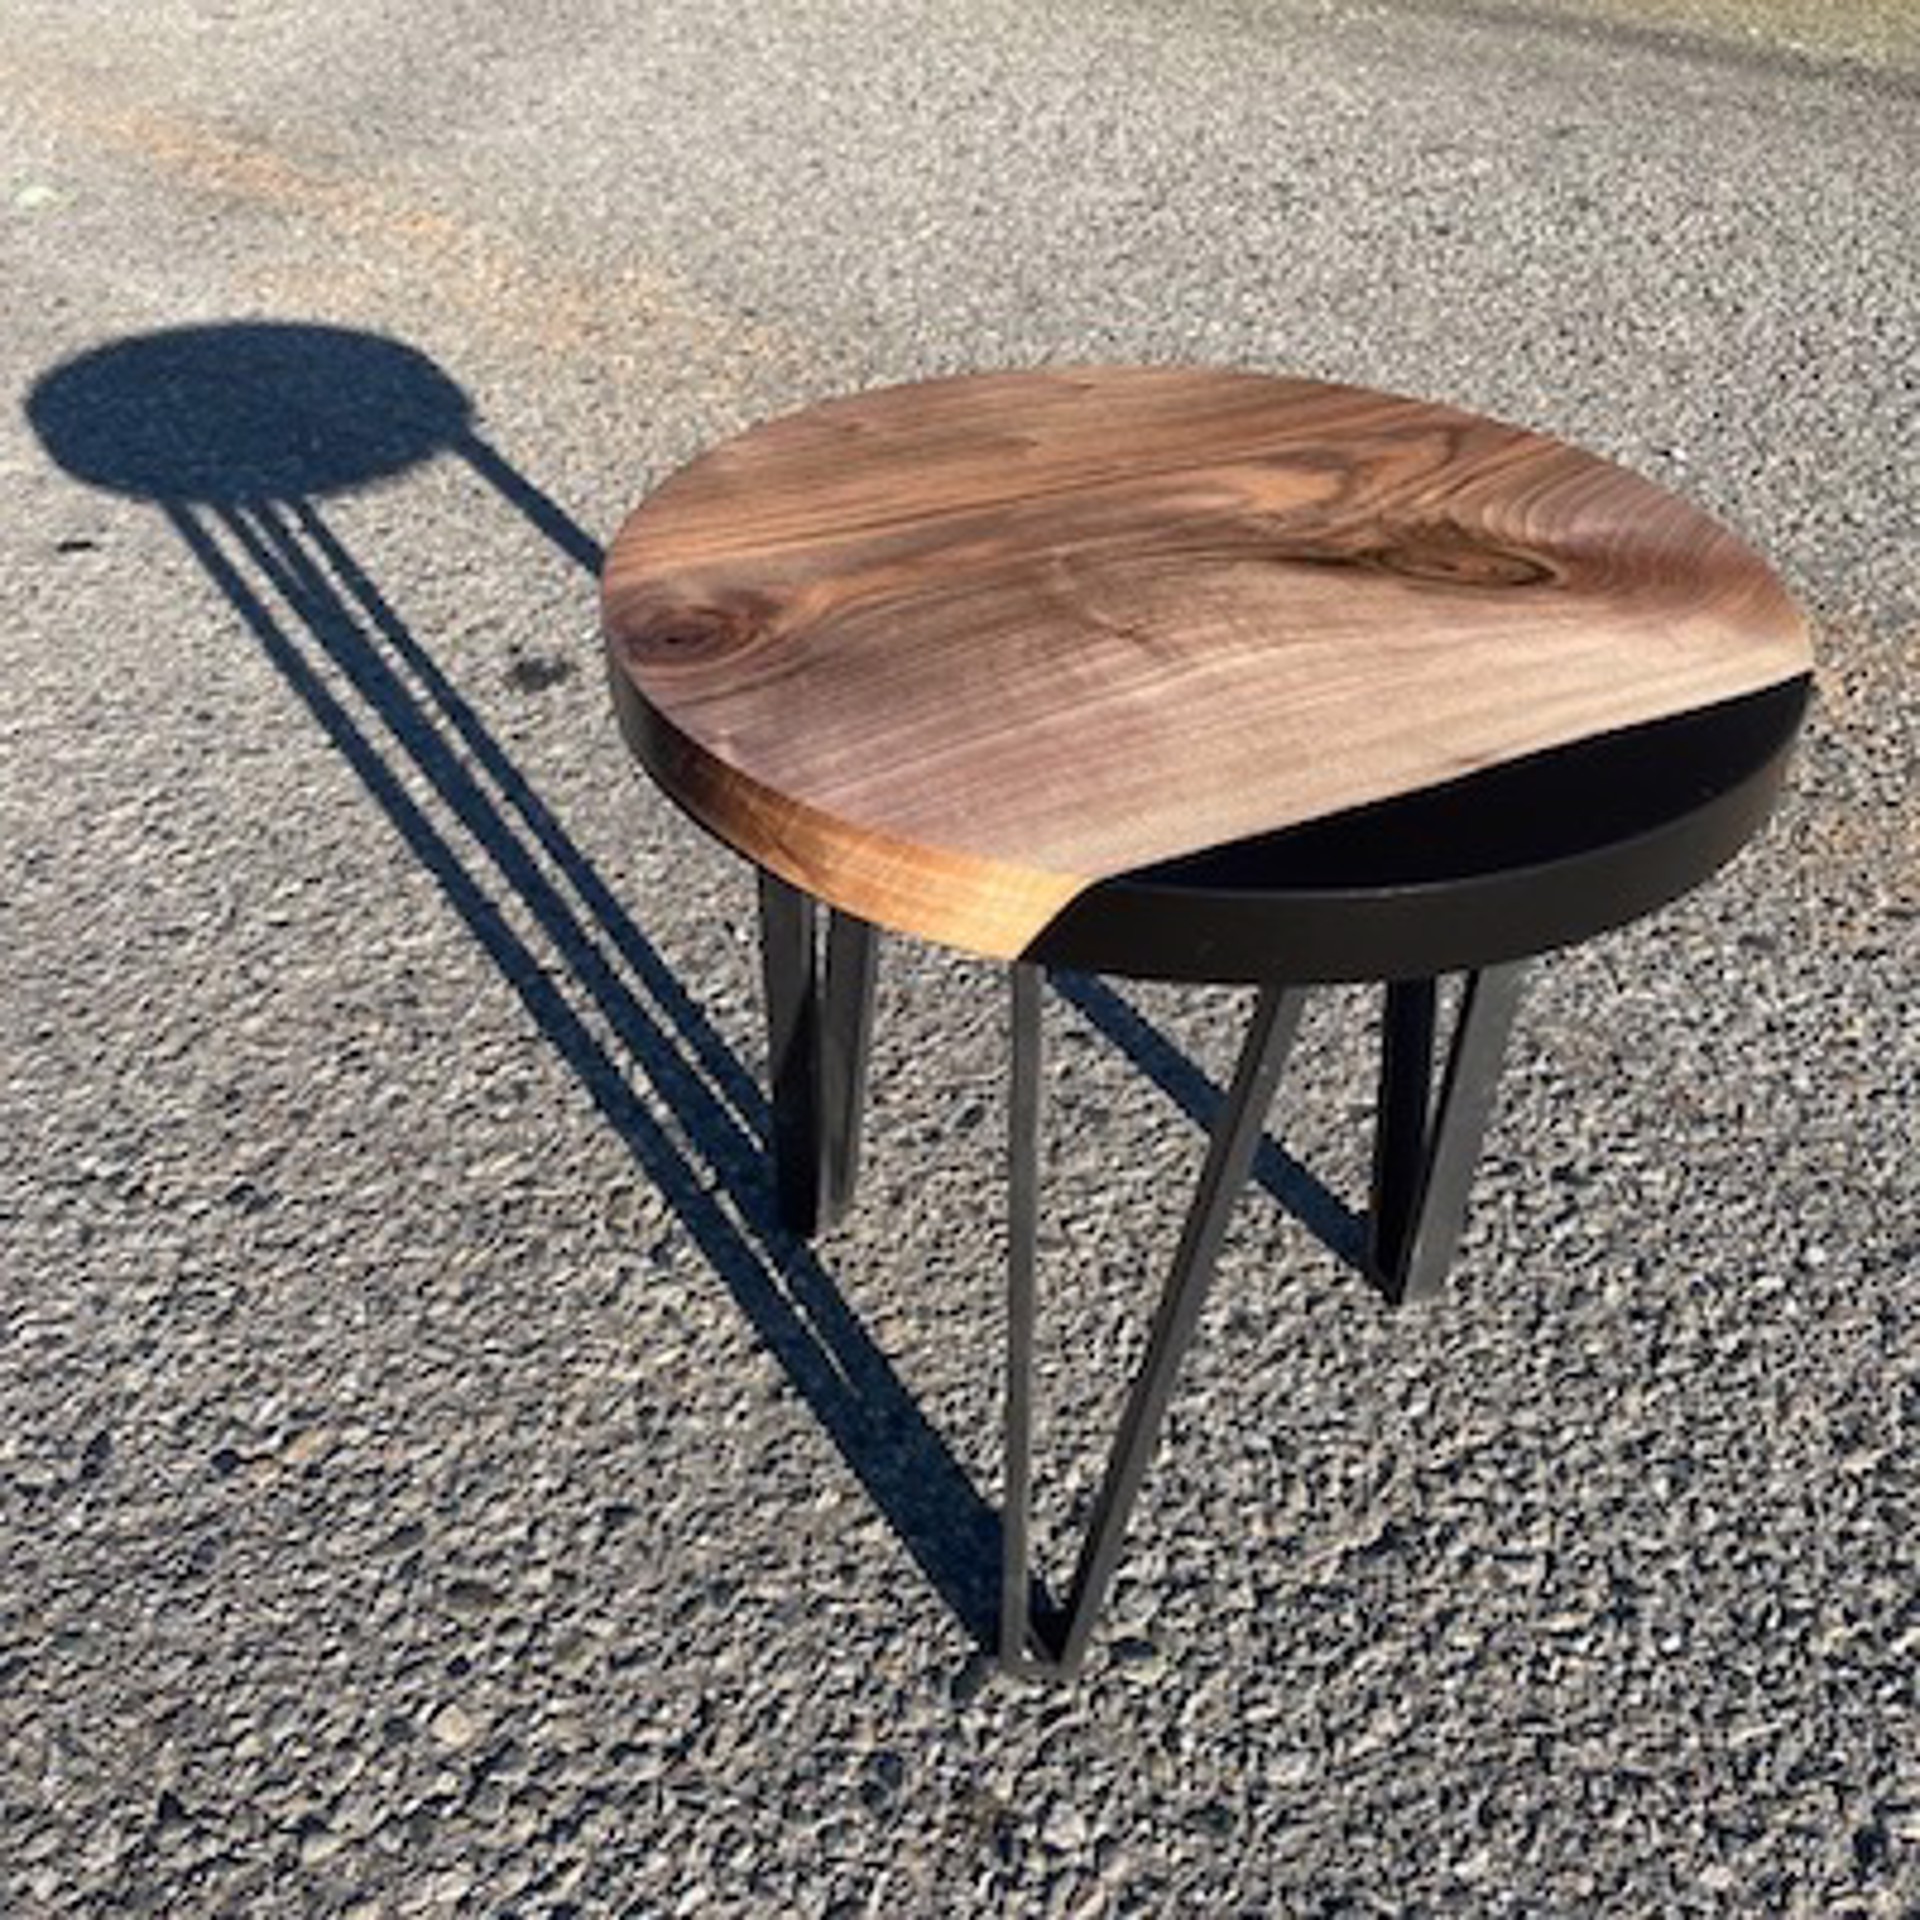 English Walnut and black resin side table by Benjamin McLaughlin